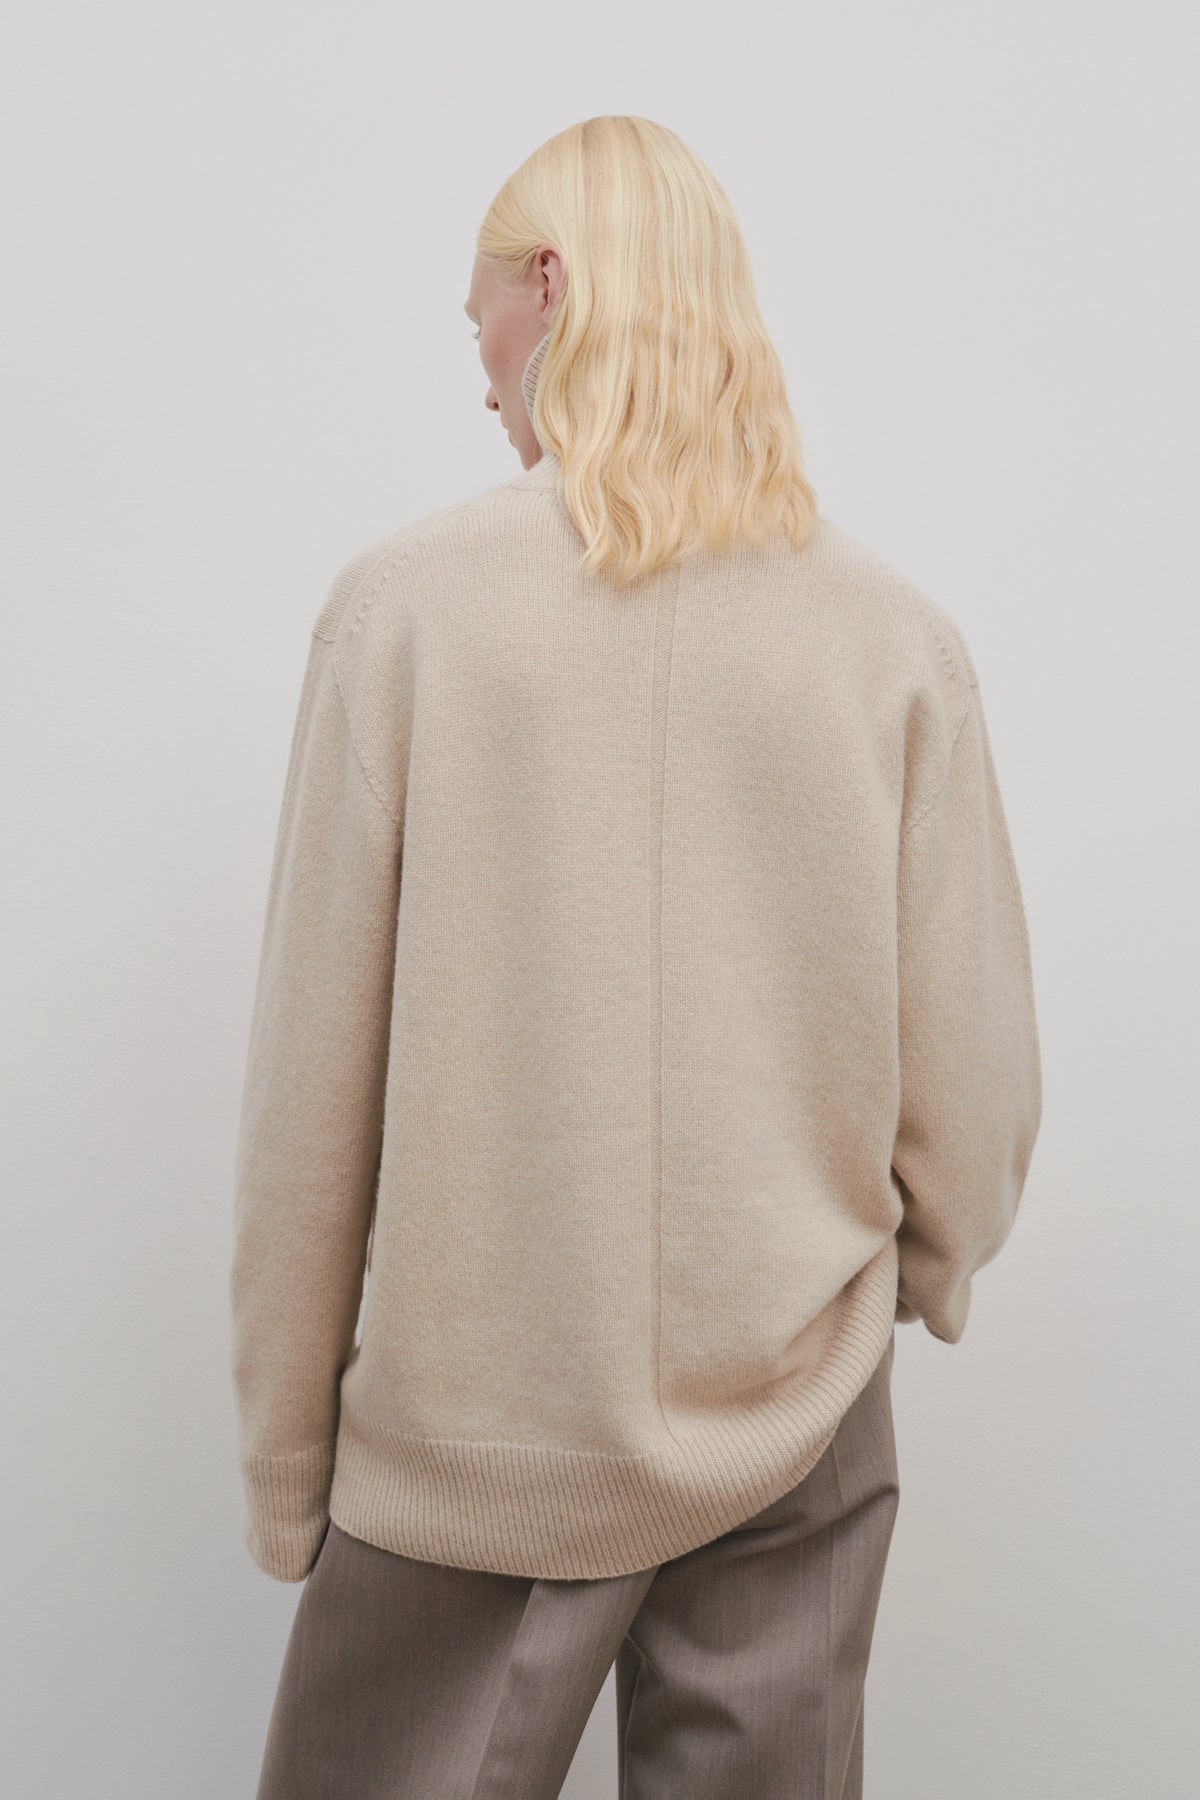 Stepny Top in Wool and Cashmere